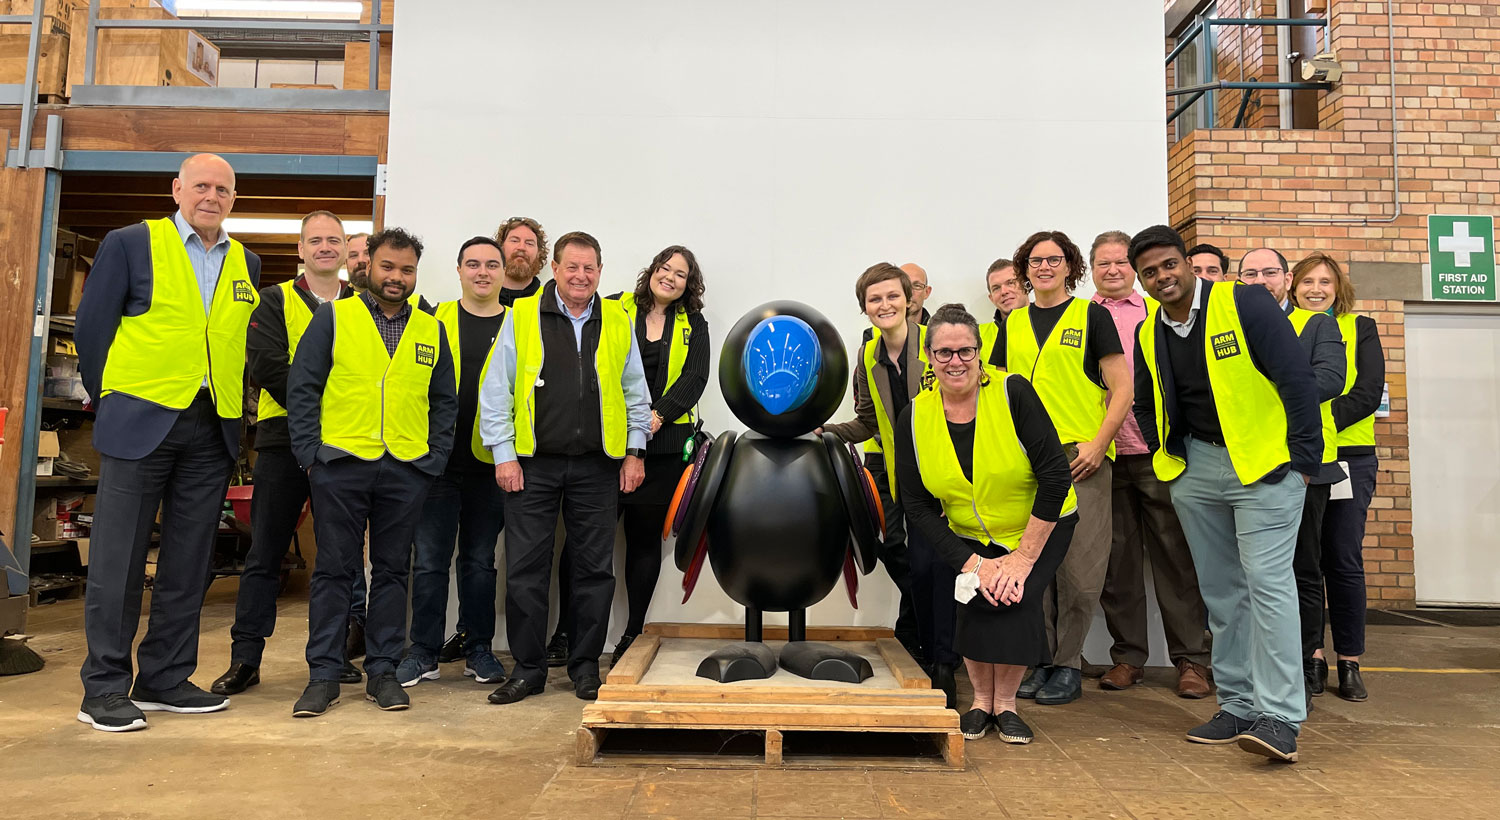 Poll the parrot tells a cracking good story for advanced manufacturing